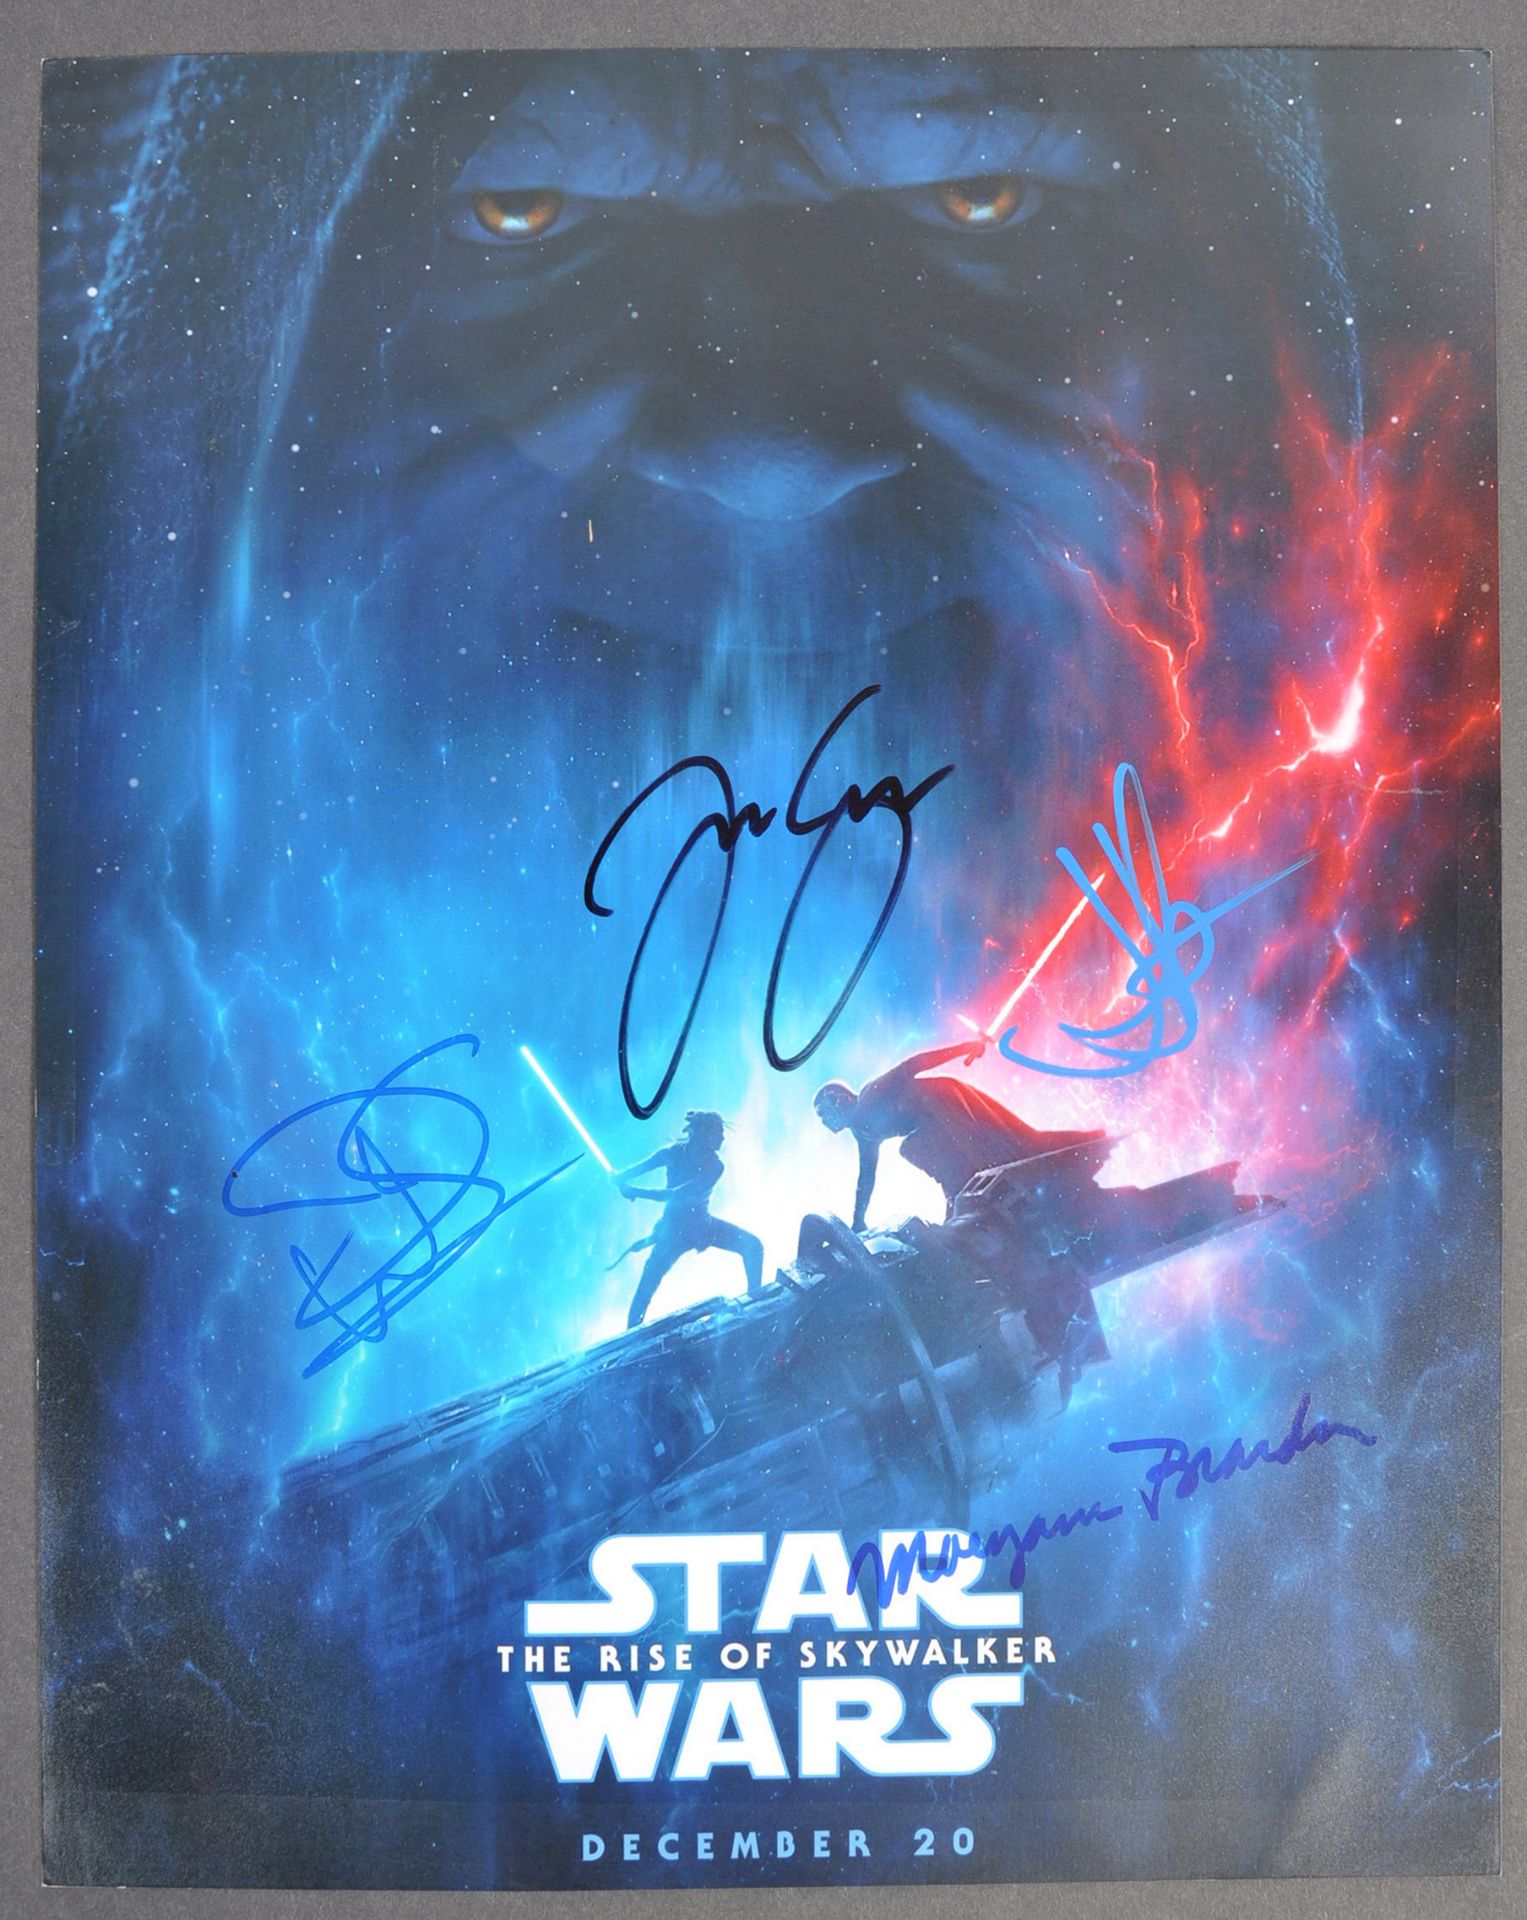 STAR WARS - THE RISE OF SKYWALKER - SIGNED 11X14" PHOTOGRAPH